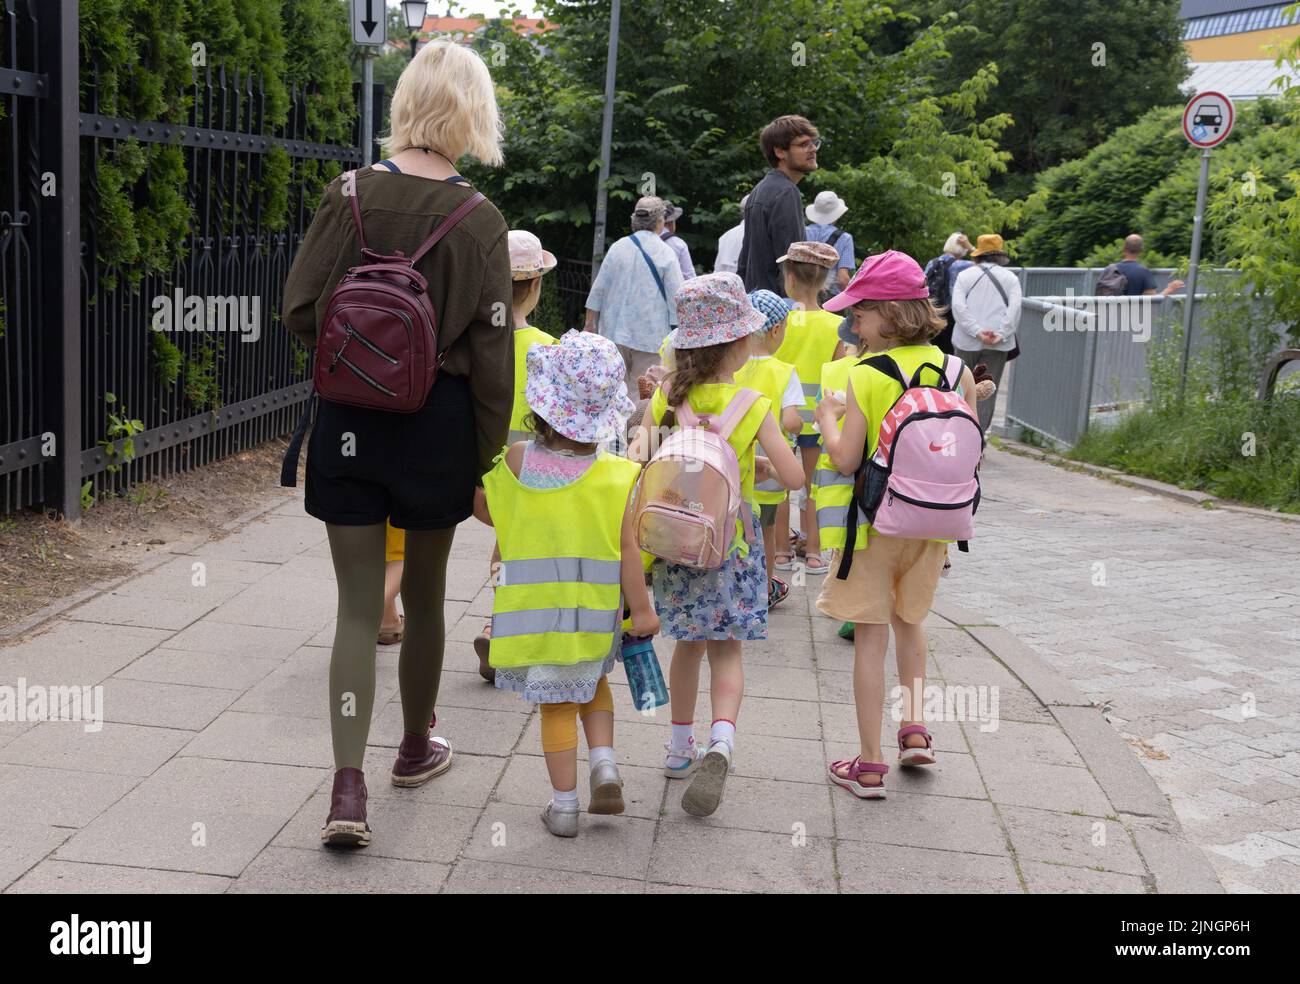 Lithuania children; A group of primary schoolchildren aged 5-7 years walking with their school teacher in Vilnius, Lithuania Europe Stock Photo